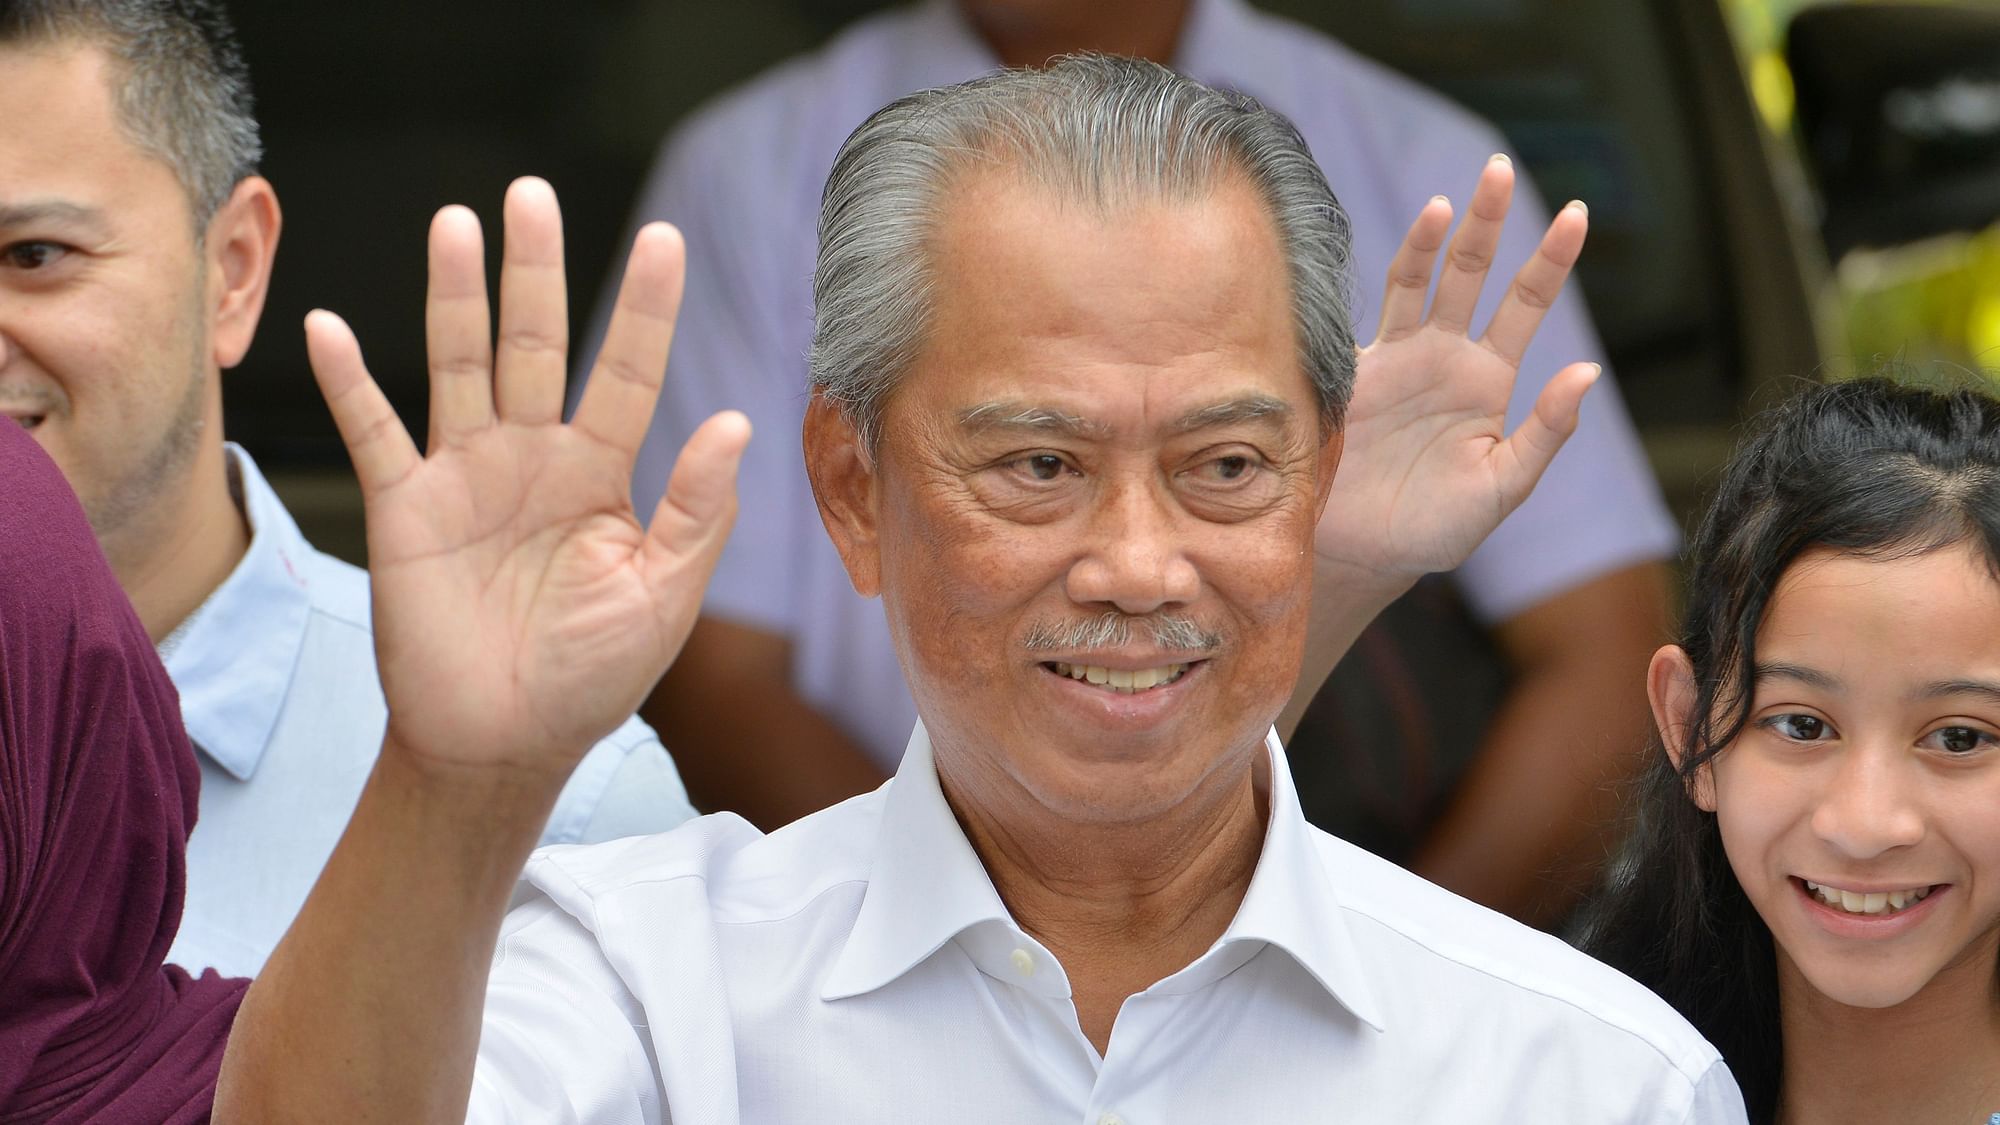 Malaysia’s King on Saturday, 29 February, appointed seasoned politician Muhyiddin Yassin as the new prime minister, trumping former PM Mahathir Mohamad’s bid to return to power.